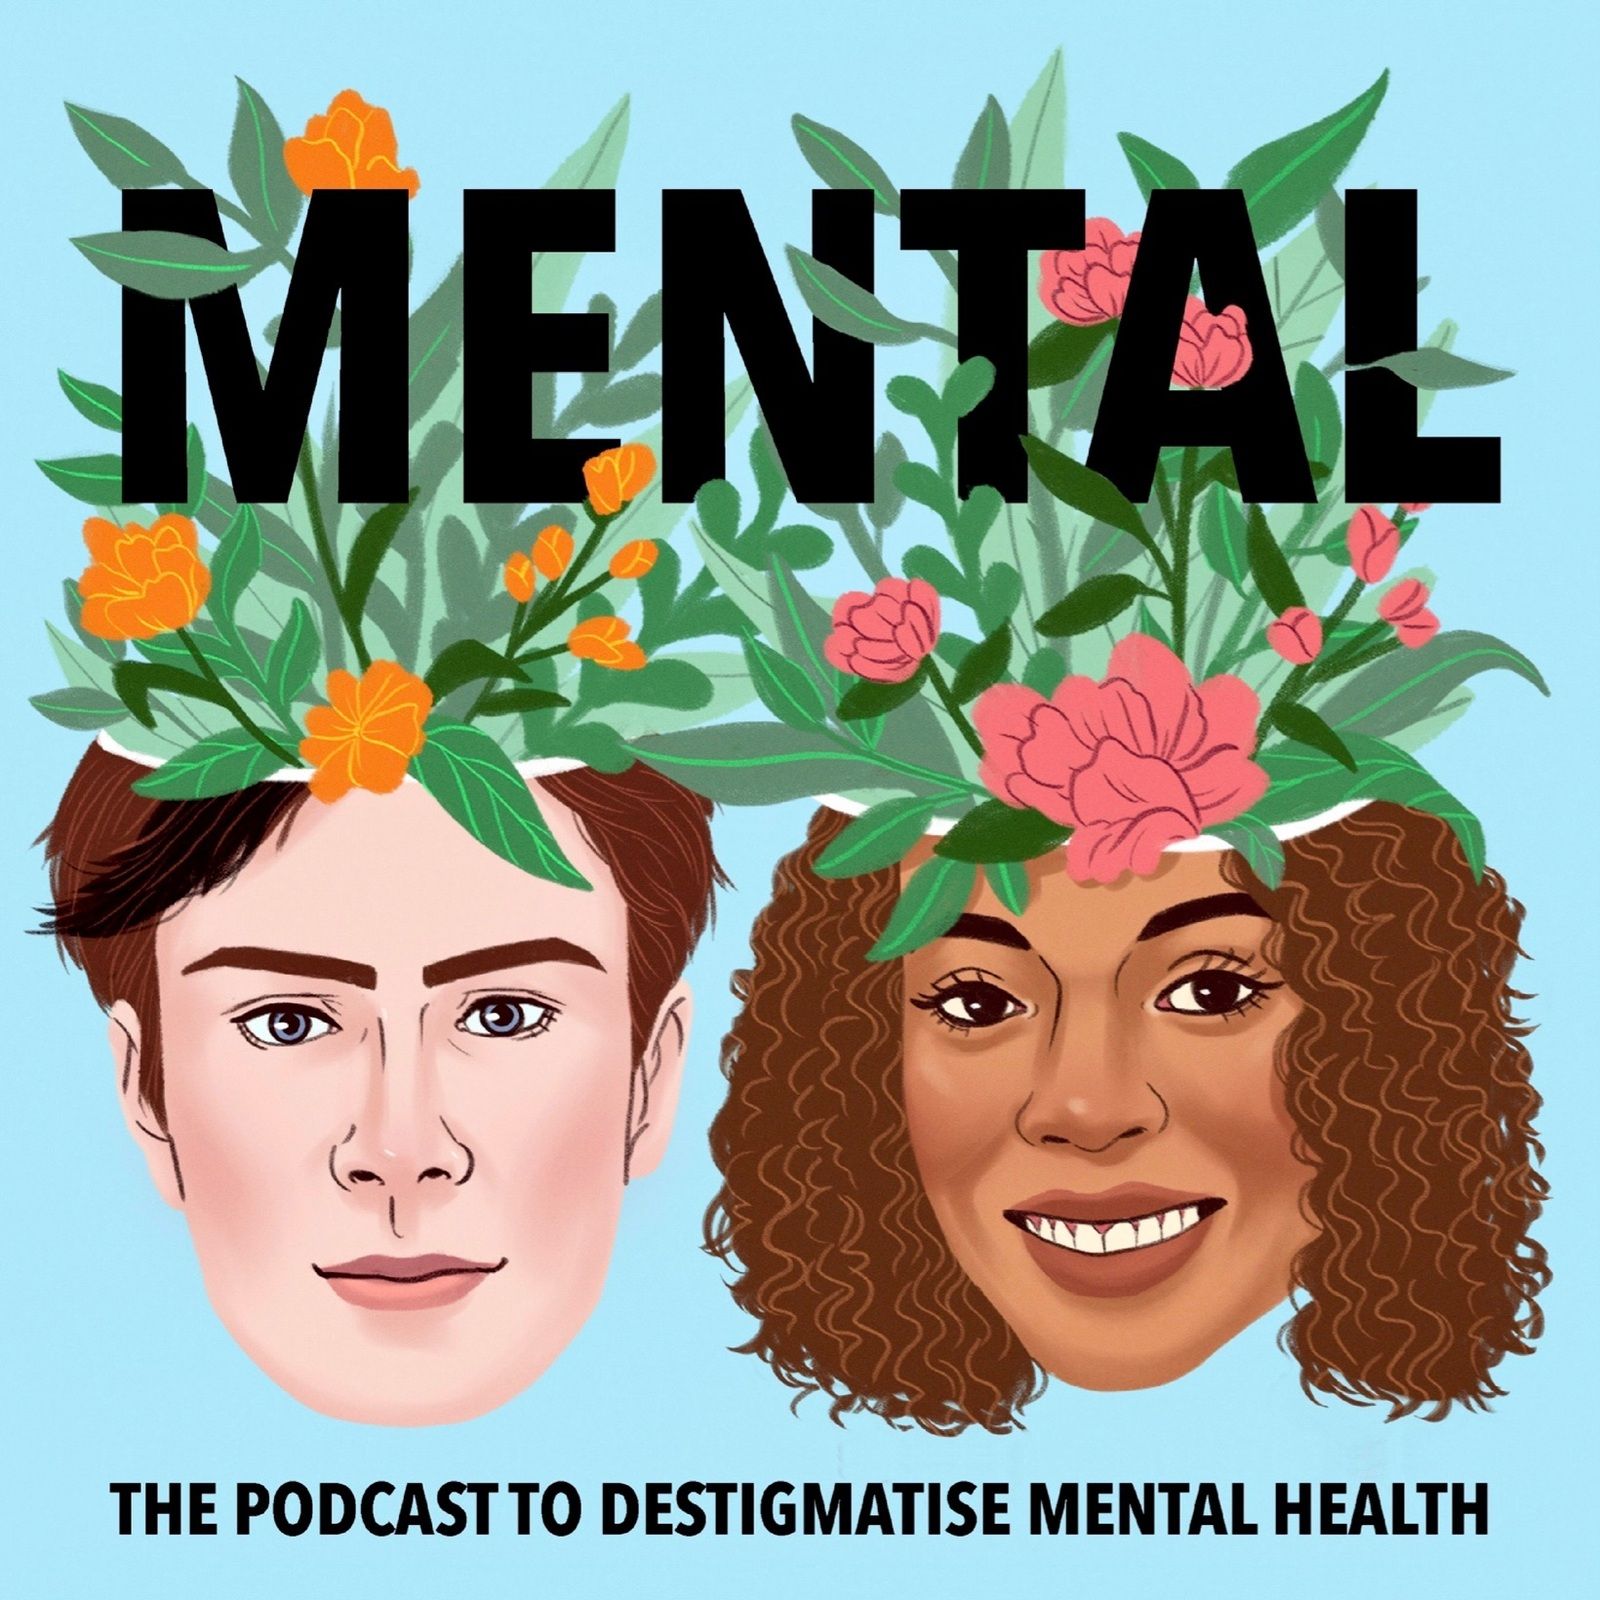 Mental - The Podcast to Destigmatise Mental Health - 275: Self Acceptance 💐 It’s not right away, but growing into it makes me feel so much more alive with Casil McArthur (Encore)